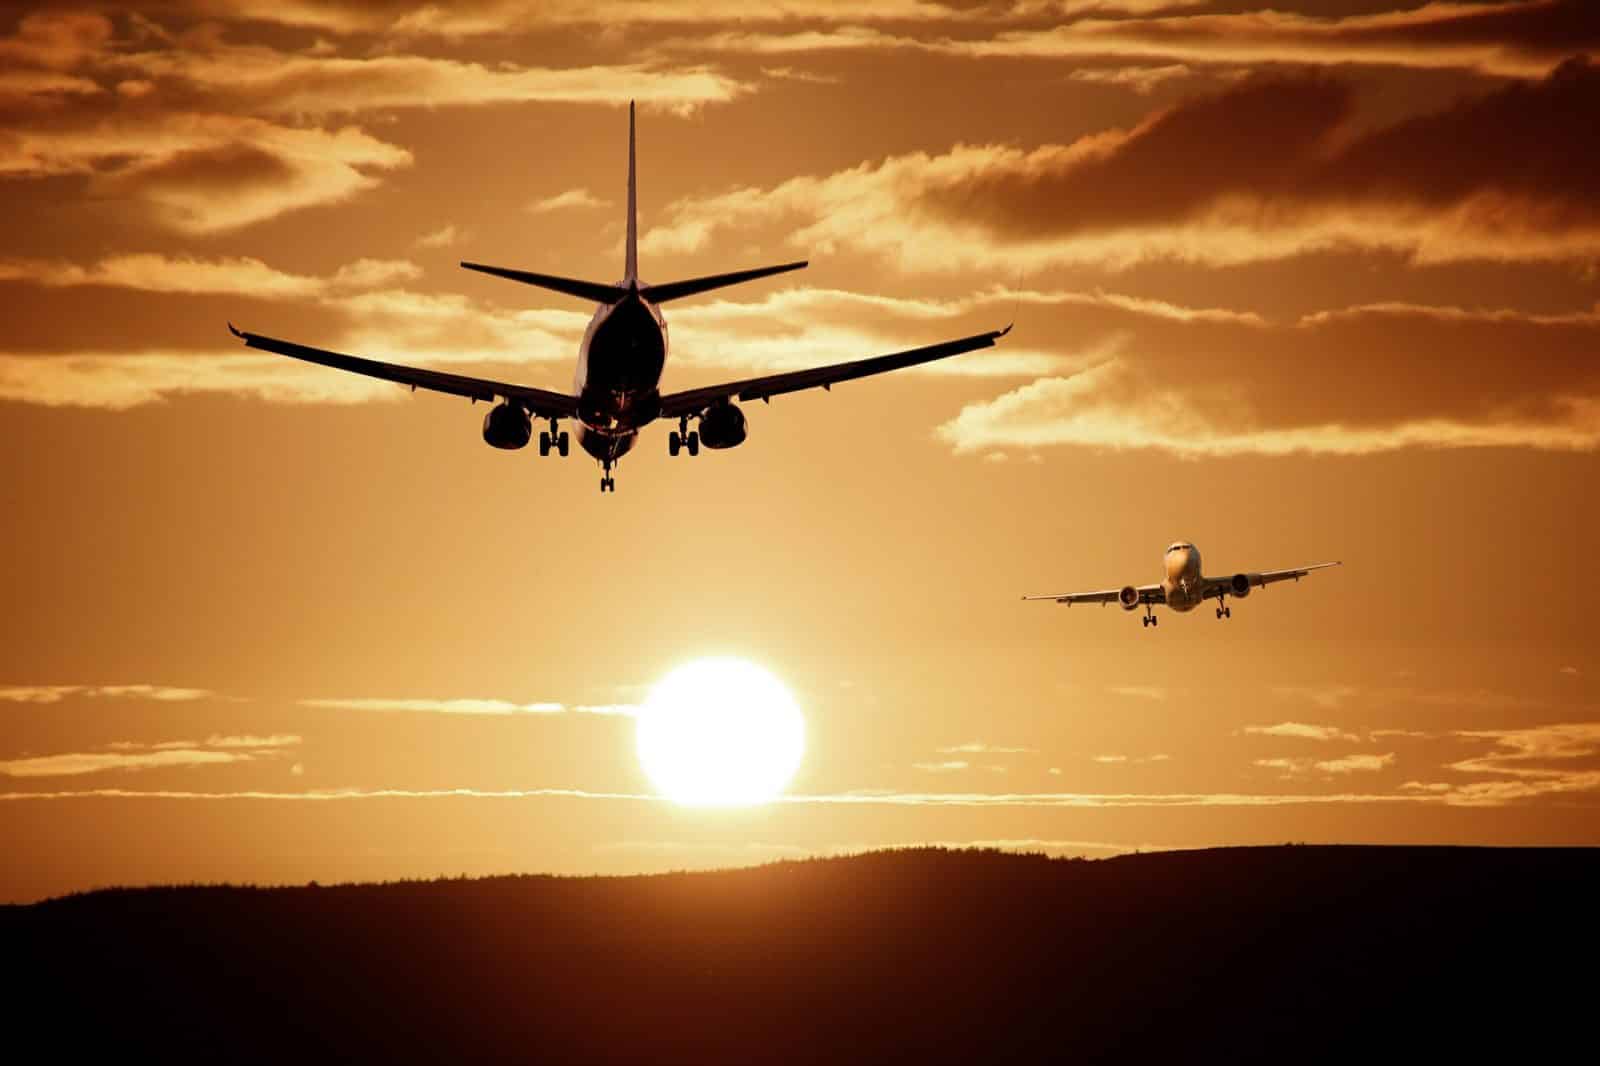 airplanes taking off into sunset is your baggage mishandled